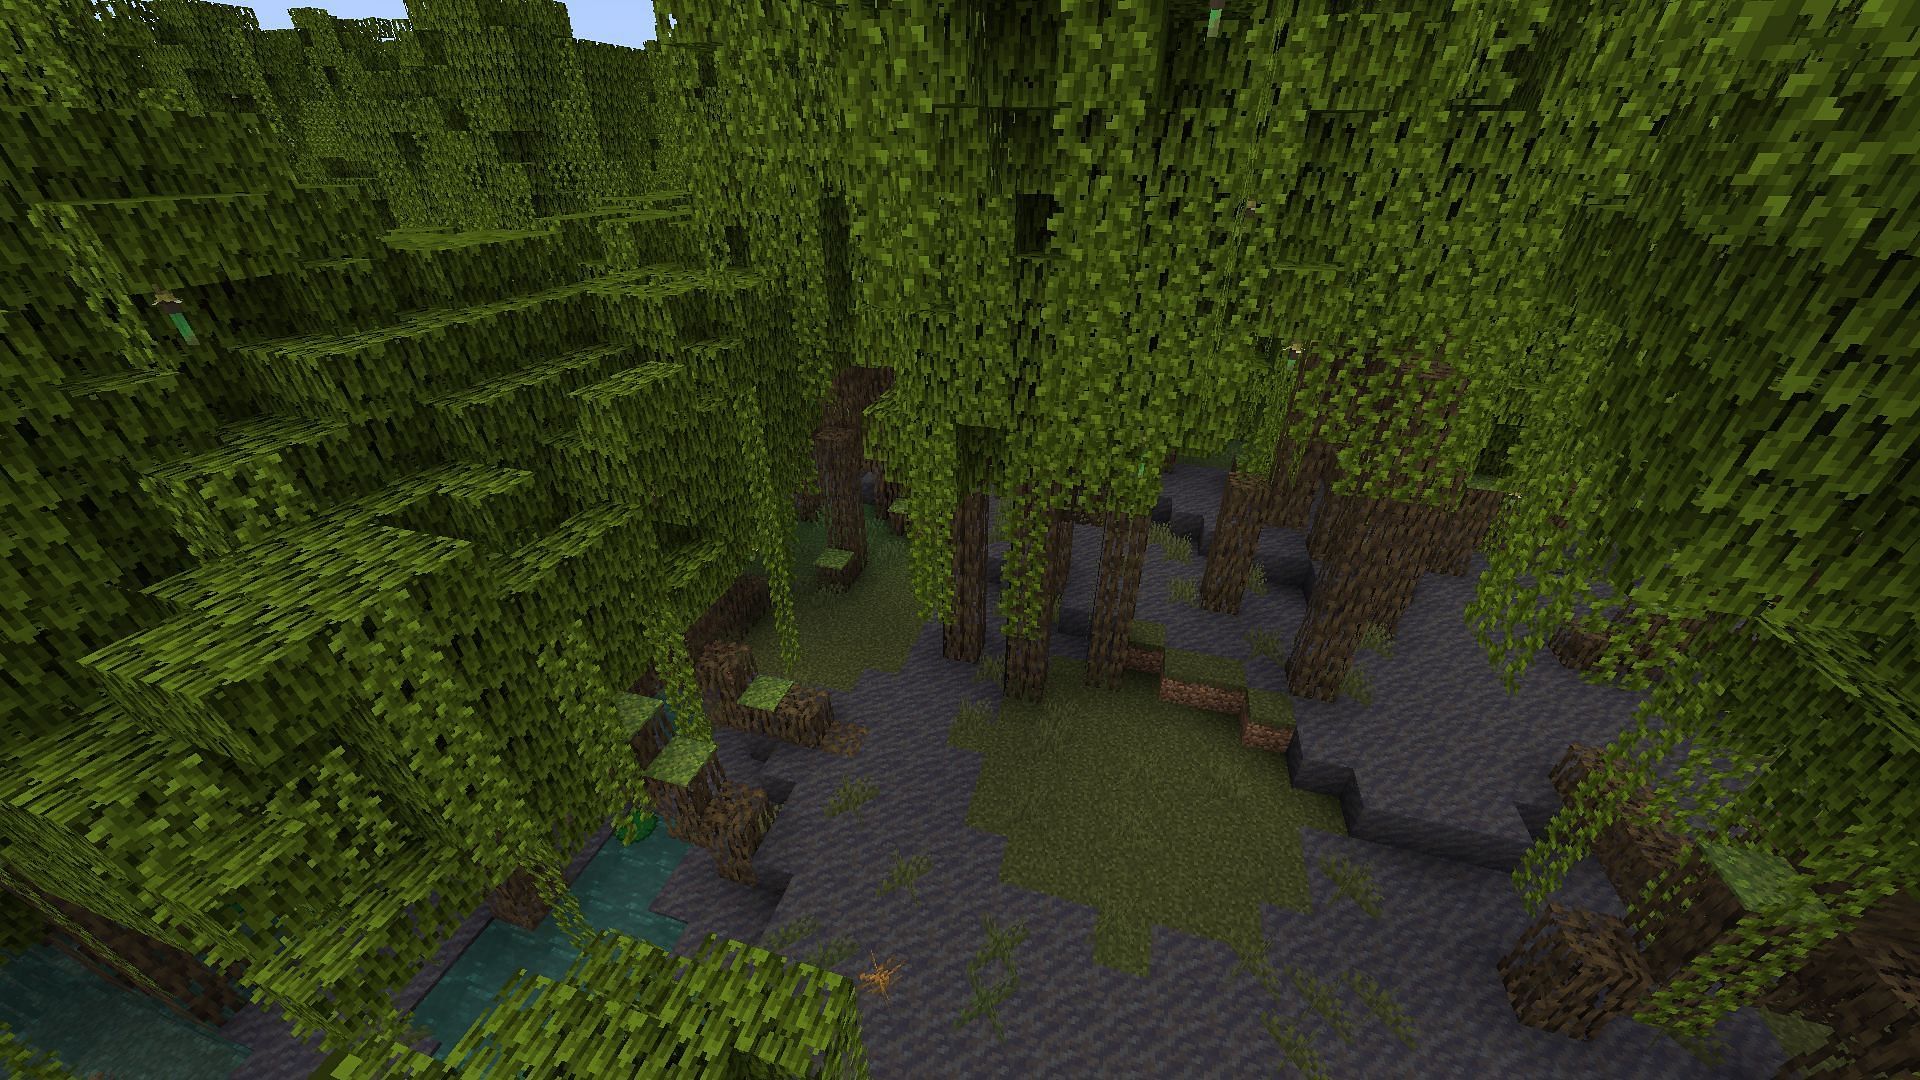 Players will spawn directly inside the Mangrove Swamp in Minecraft (Image via Mojang)